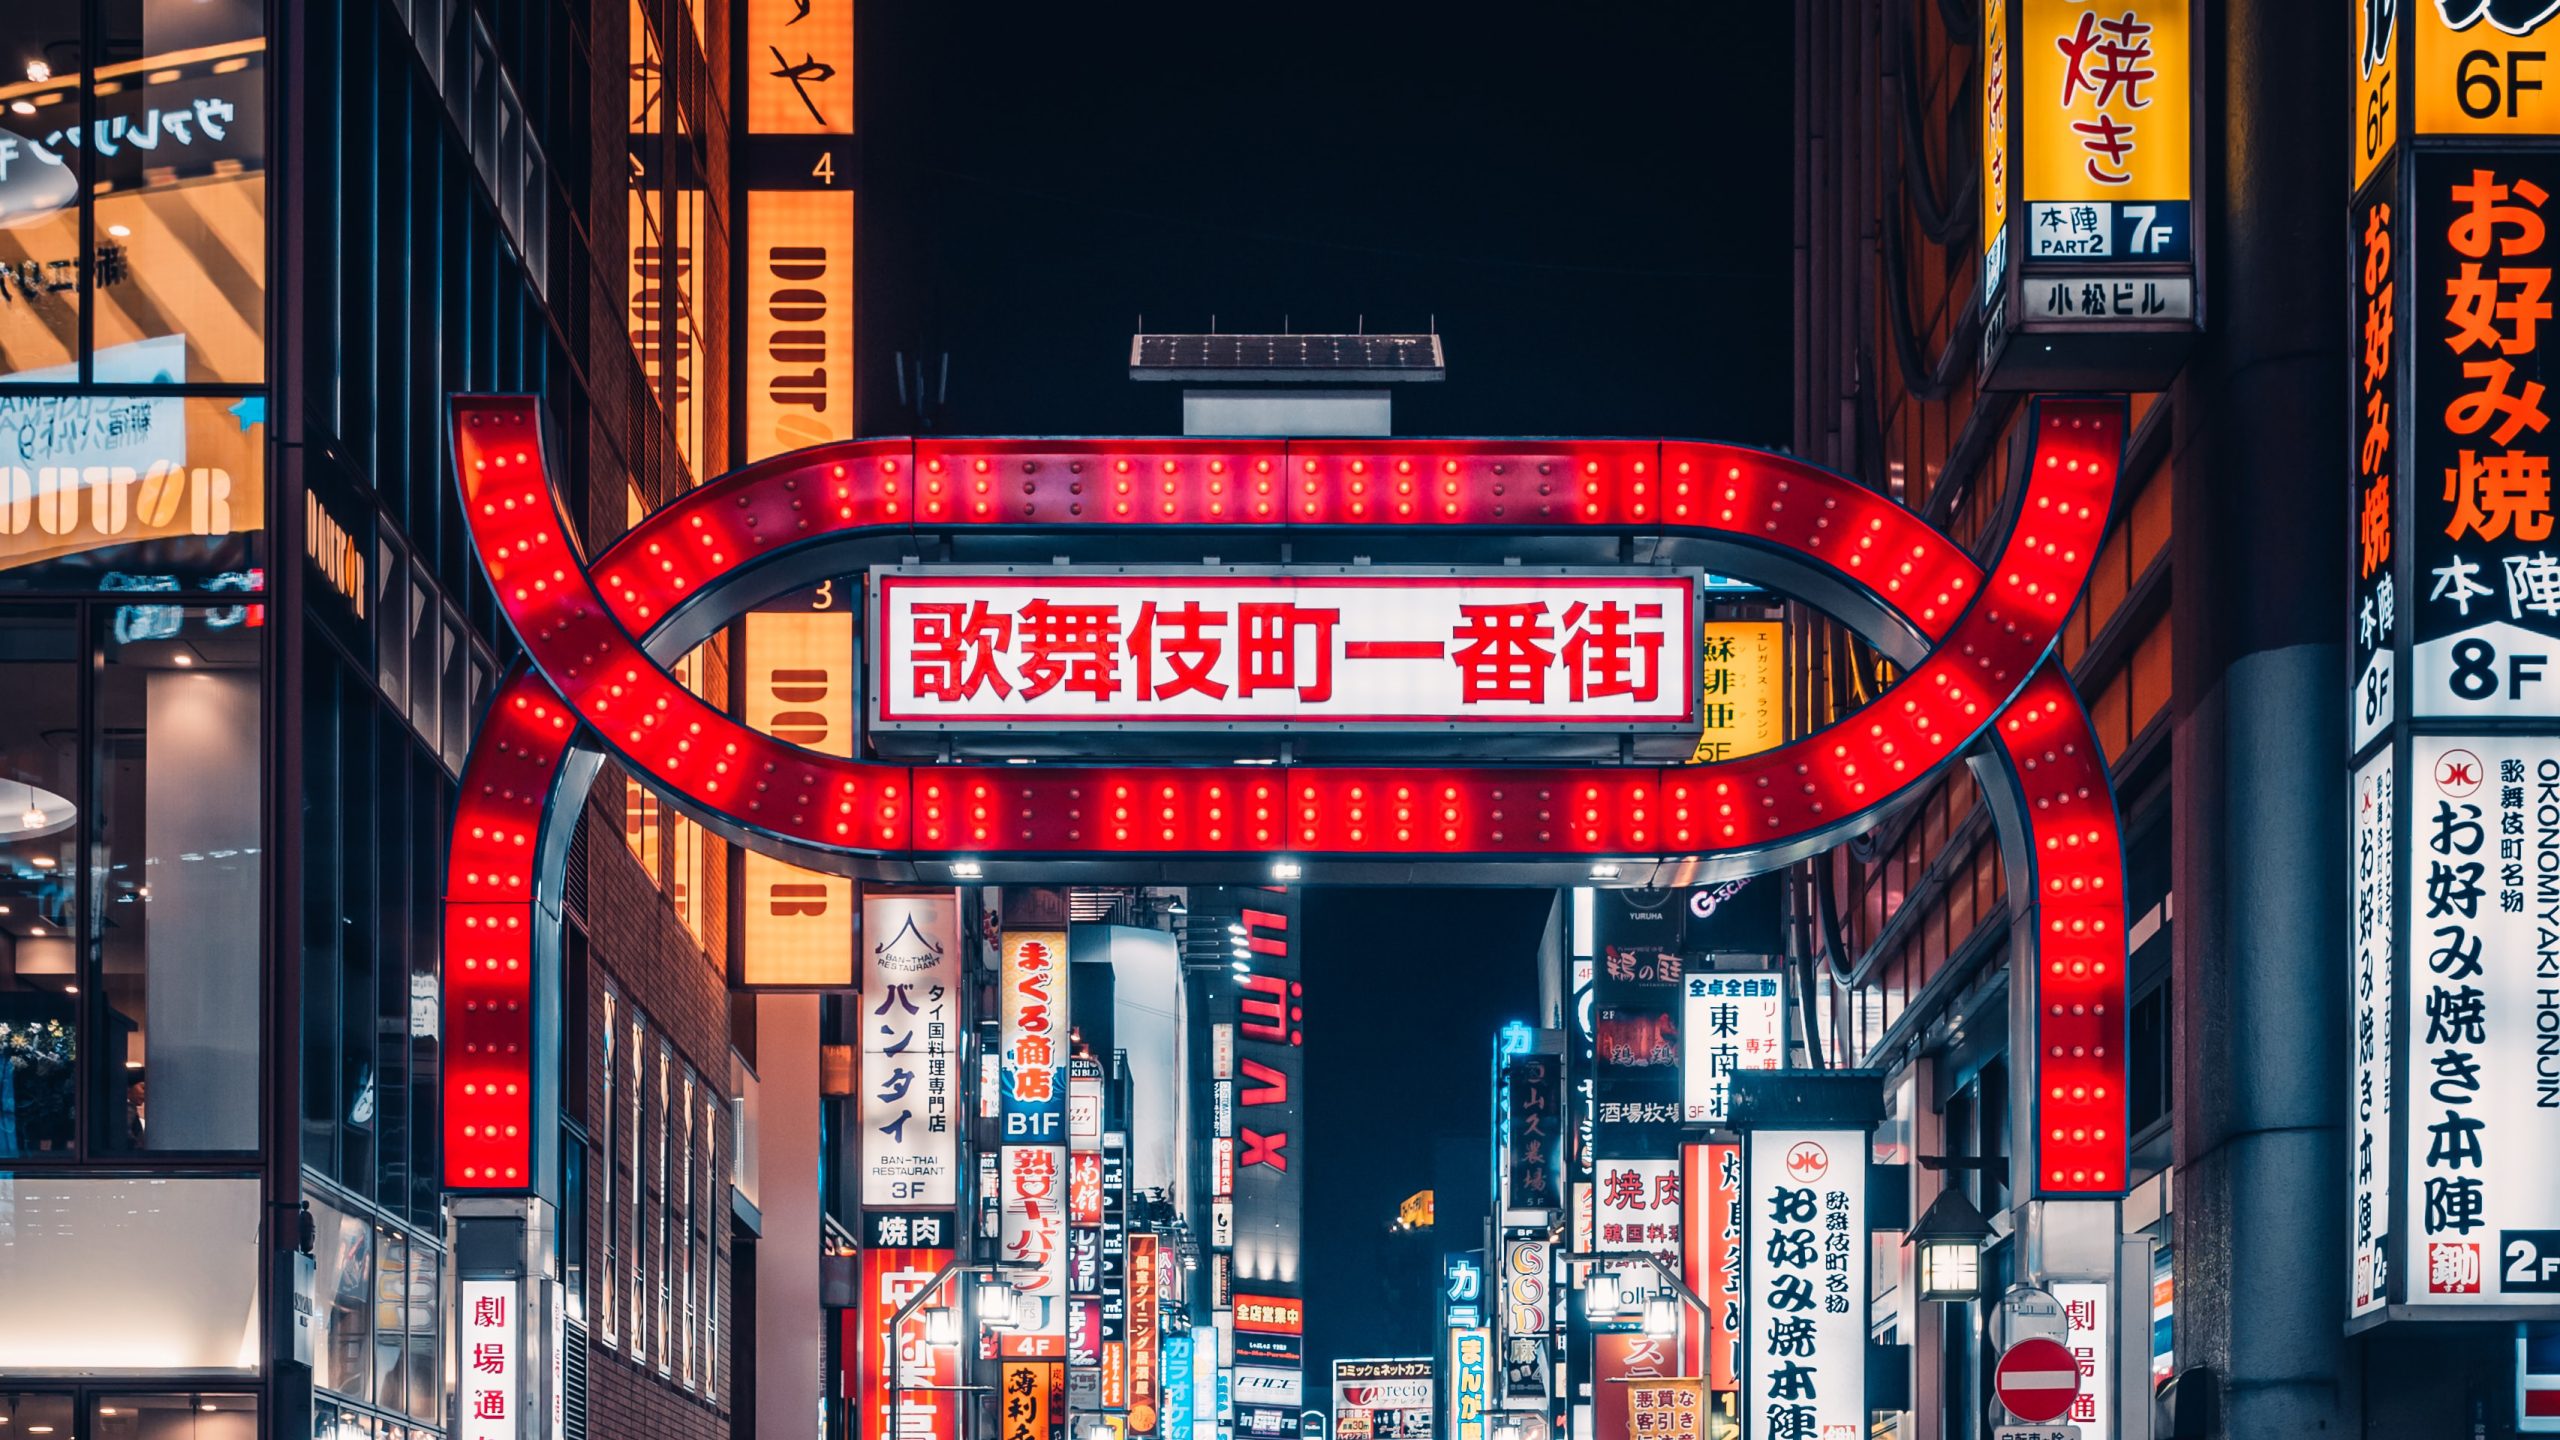 Thorough explanation of the charm of Tokyo’s “Kabukicho”, one of Japan’s three major entertainment districts